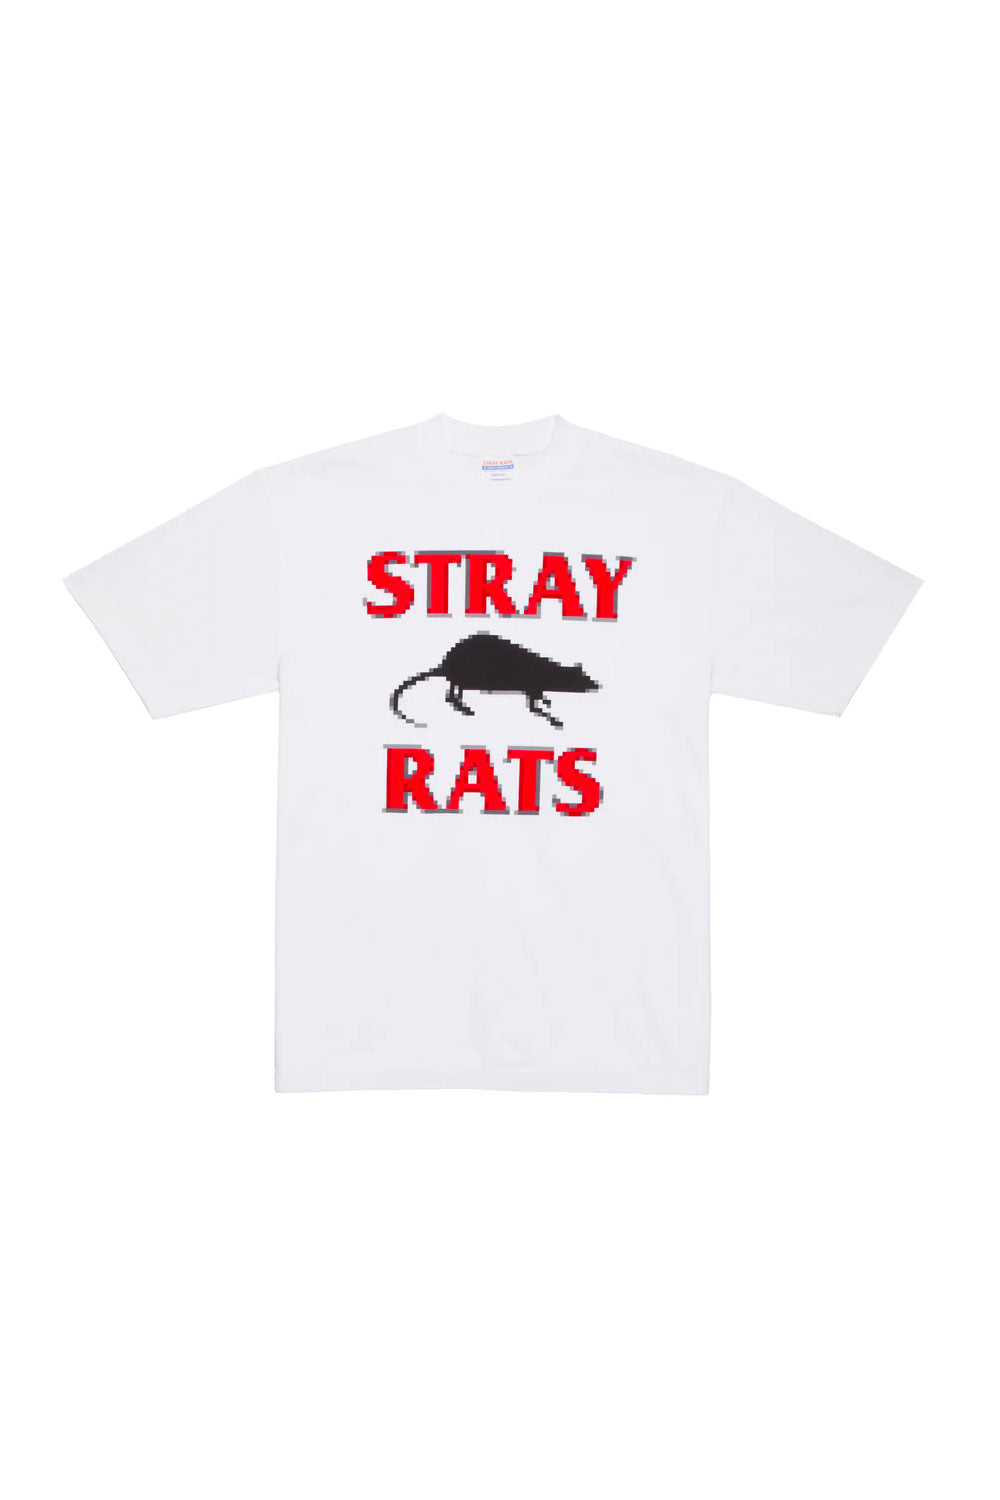 The STRAY RATS - PIXEL RODENTICIDE TEE WHITE available online with global shipping, and in PAM Stores Melbourne and Sydney.